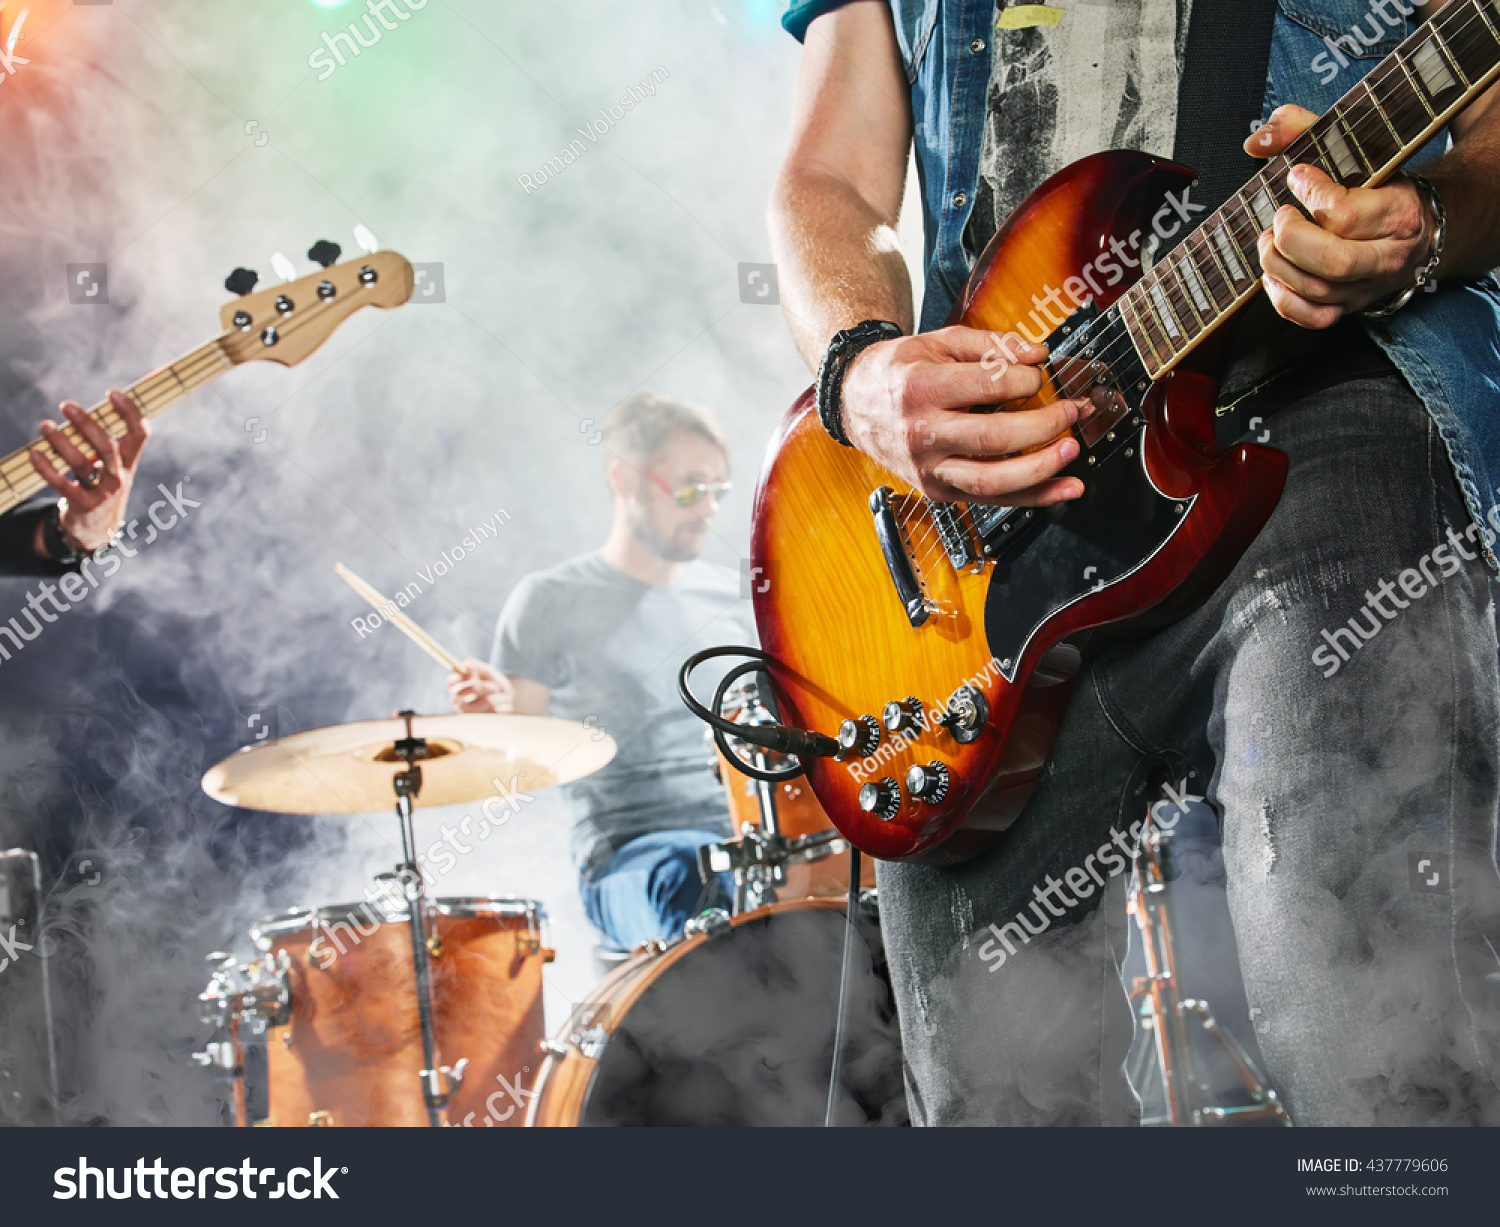 Rock band performs on stage. Guitarist, bass guitar and drums. Guitarist in the foreground. Close-up. #437779606